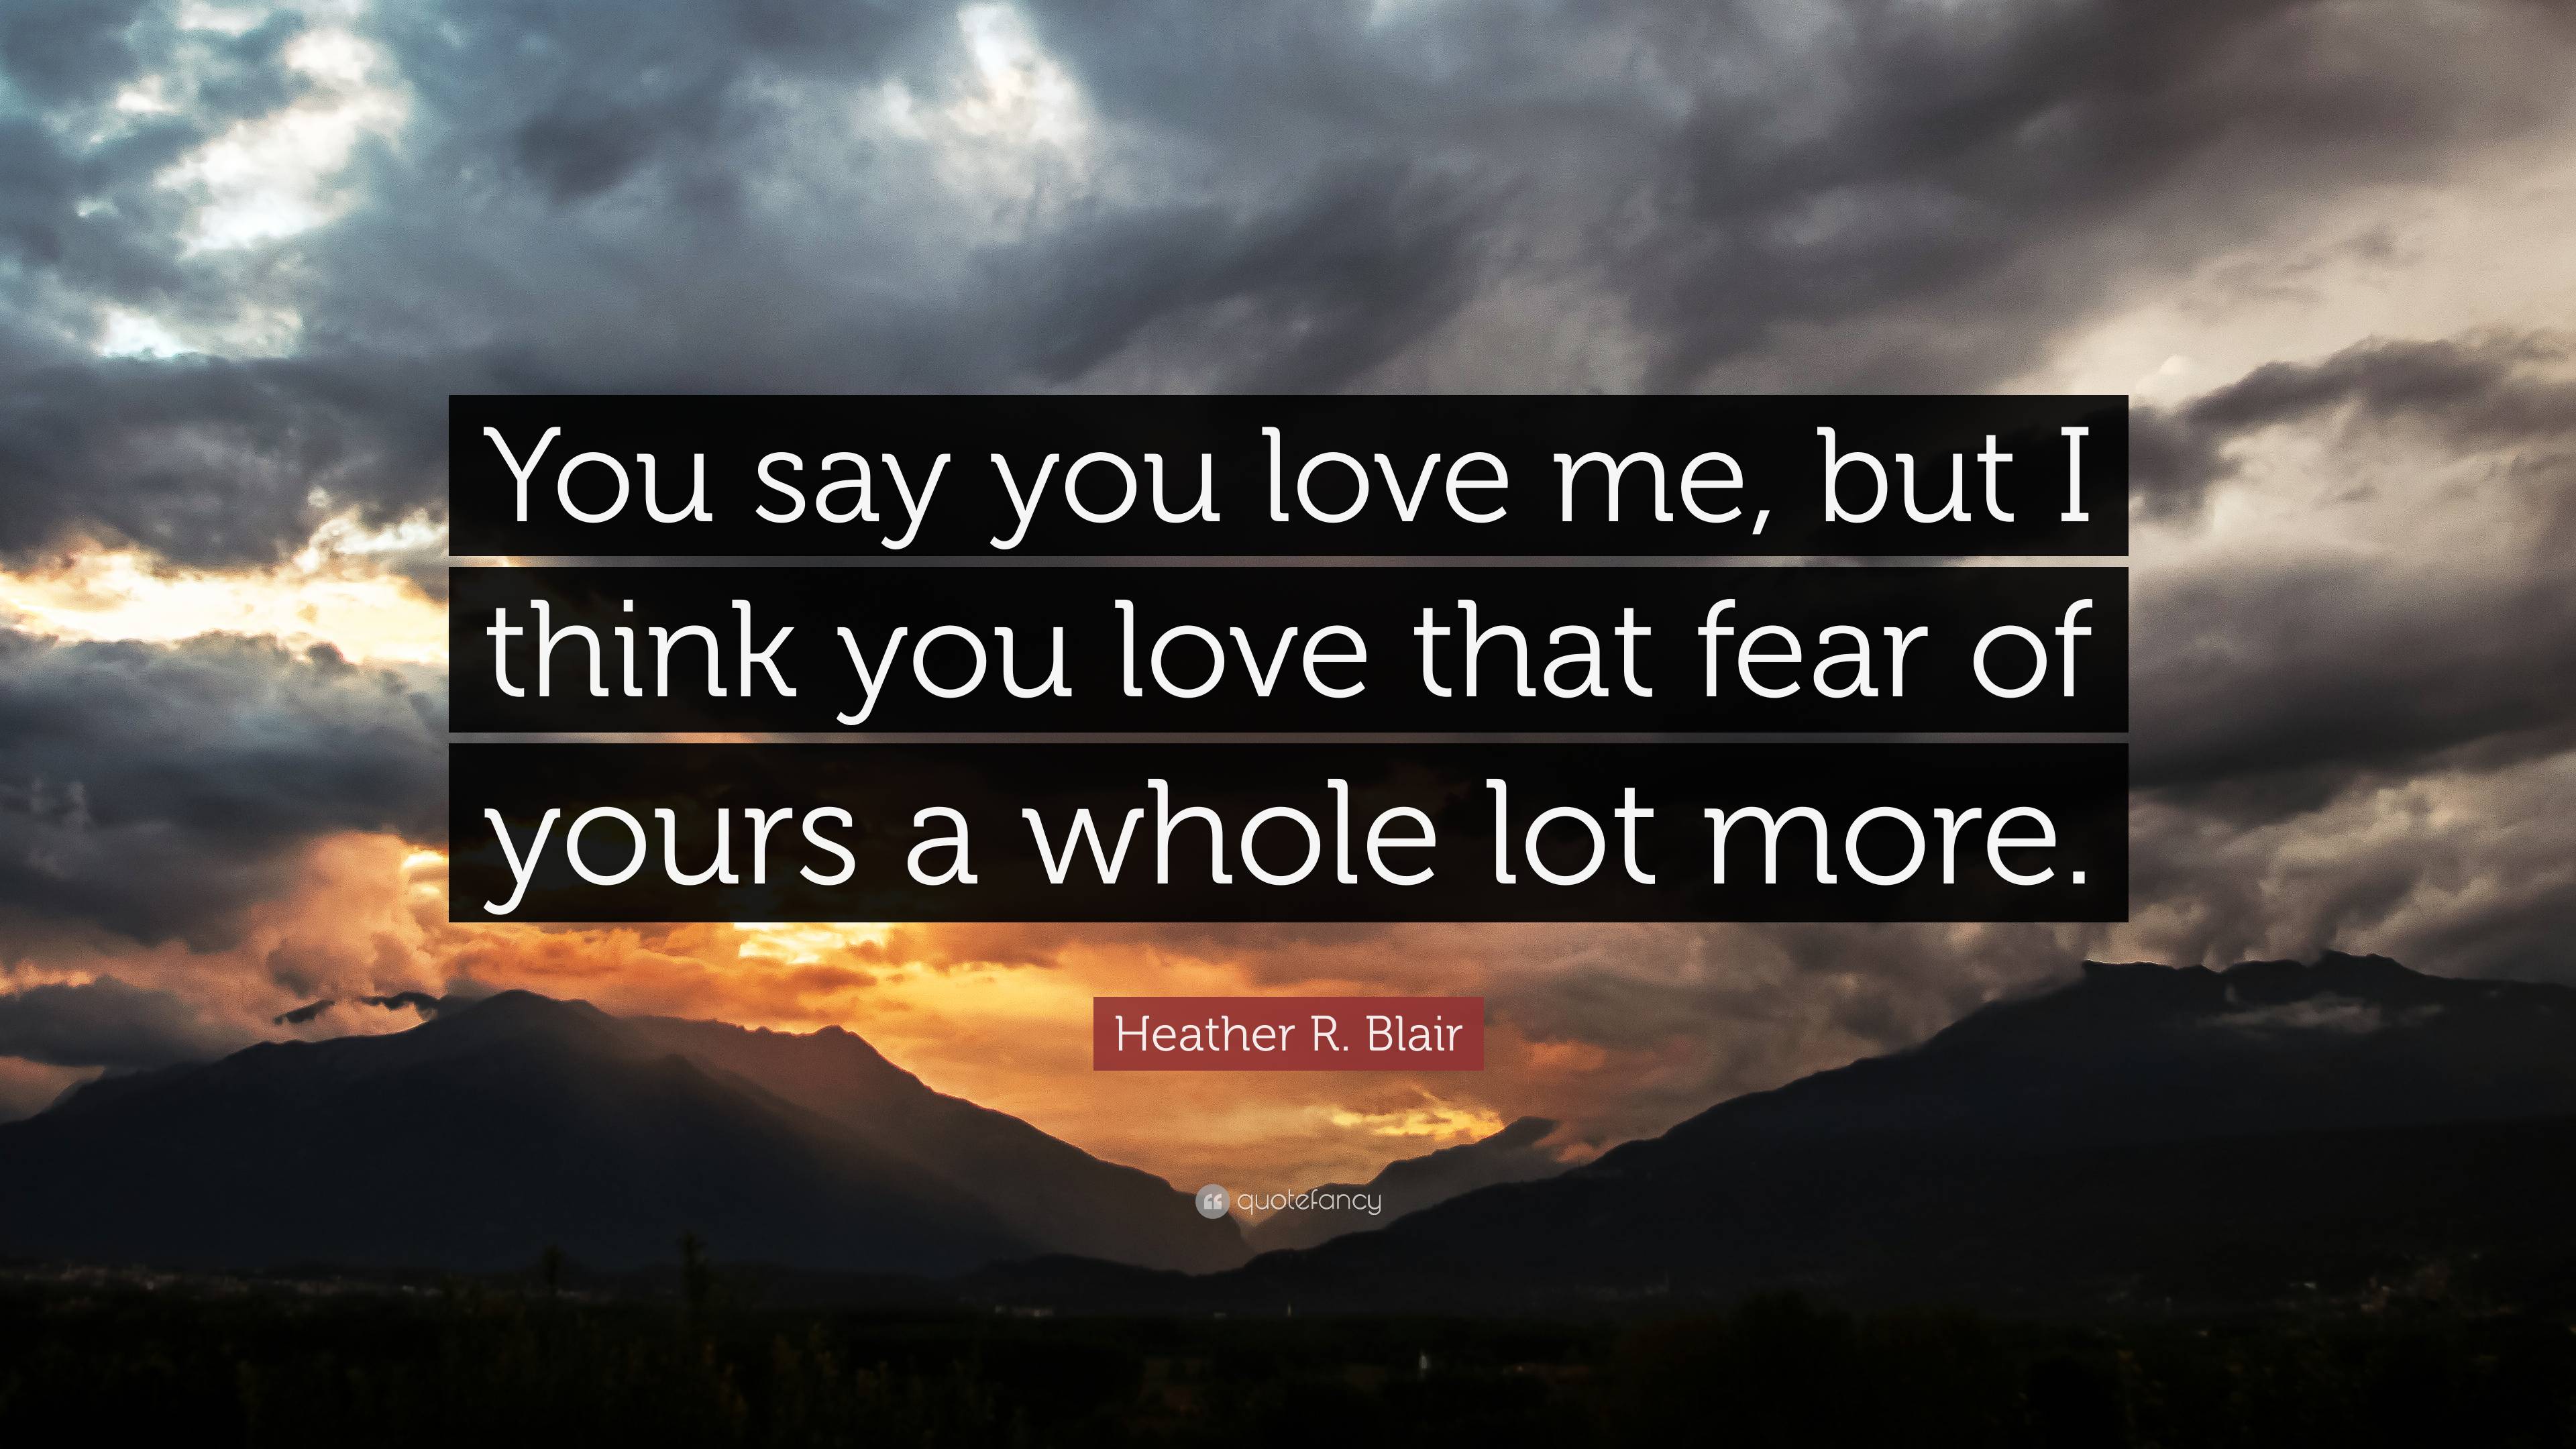 Heather R. Blair Quote: “You say you love me, but I think you love that fear